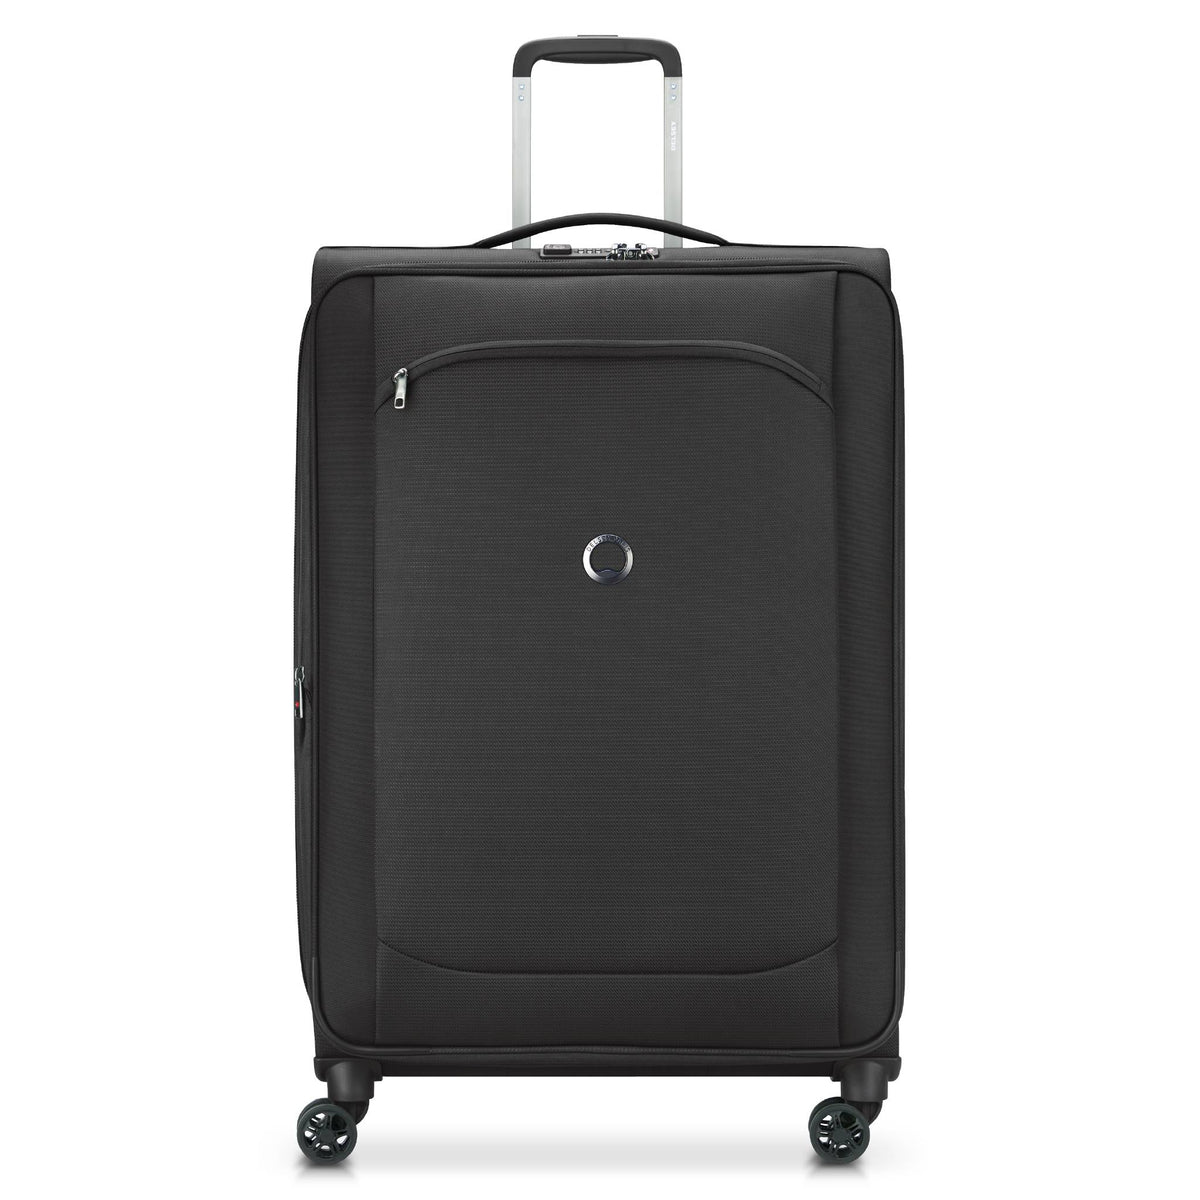 MONTMARTRE AIR 2.0 Soft Side 4W Luggage..